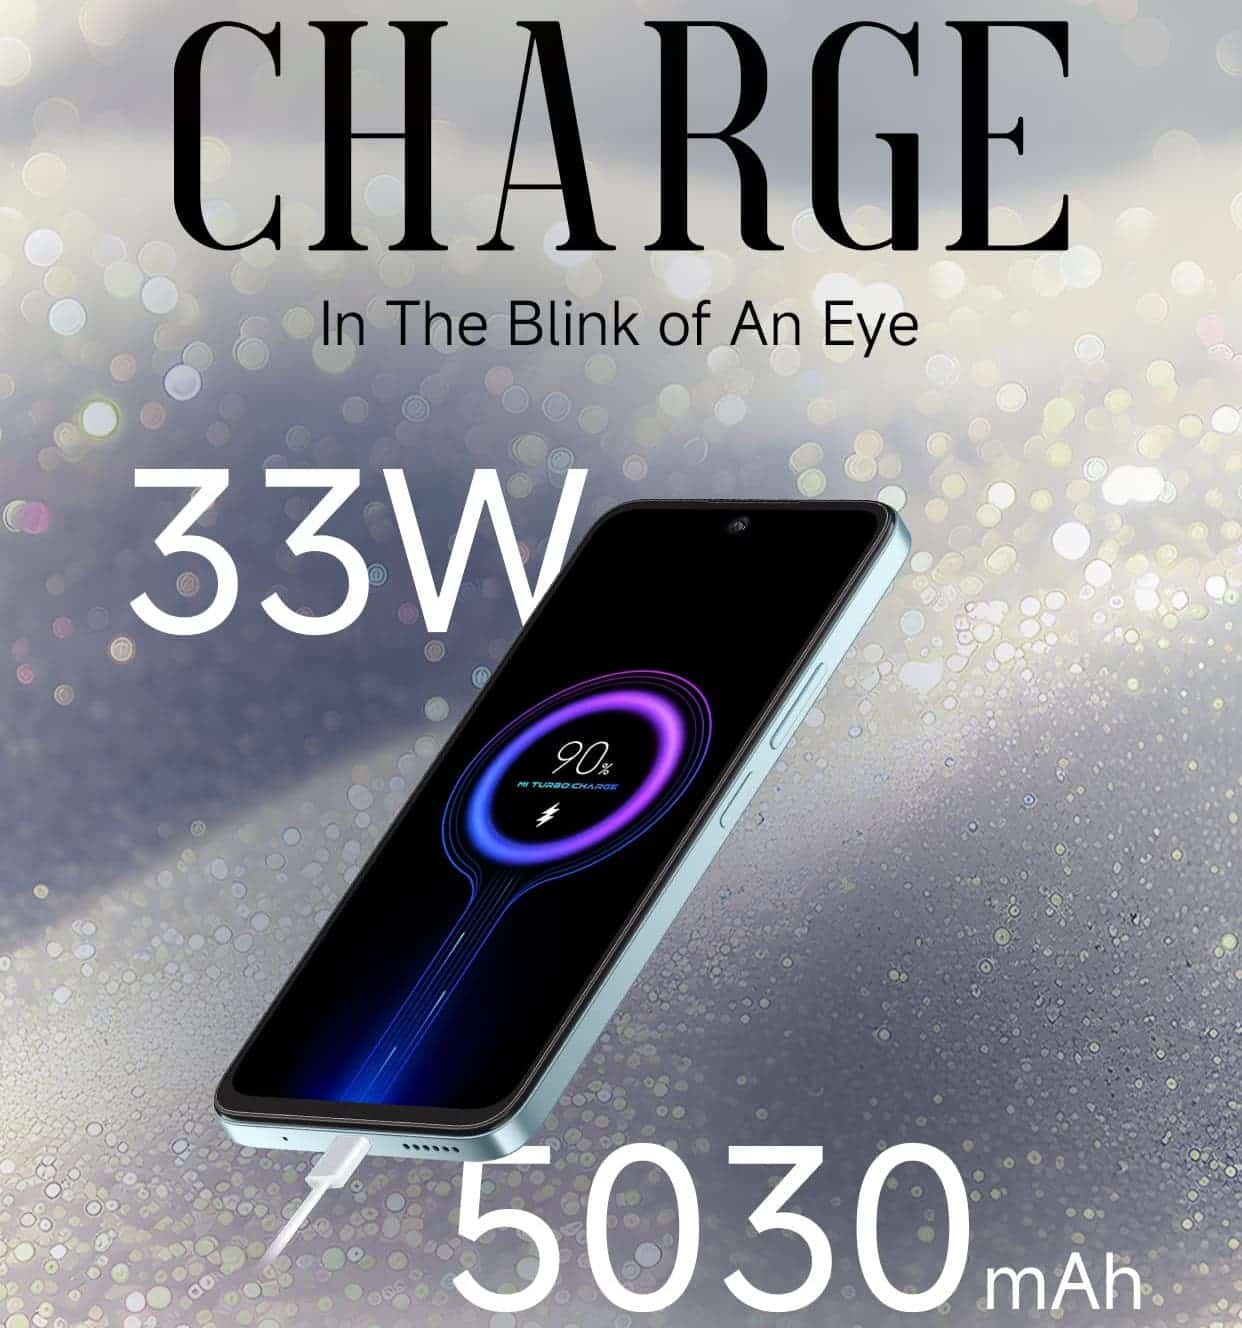 Battery and charging specs